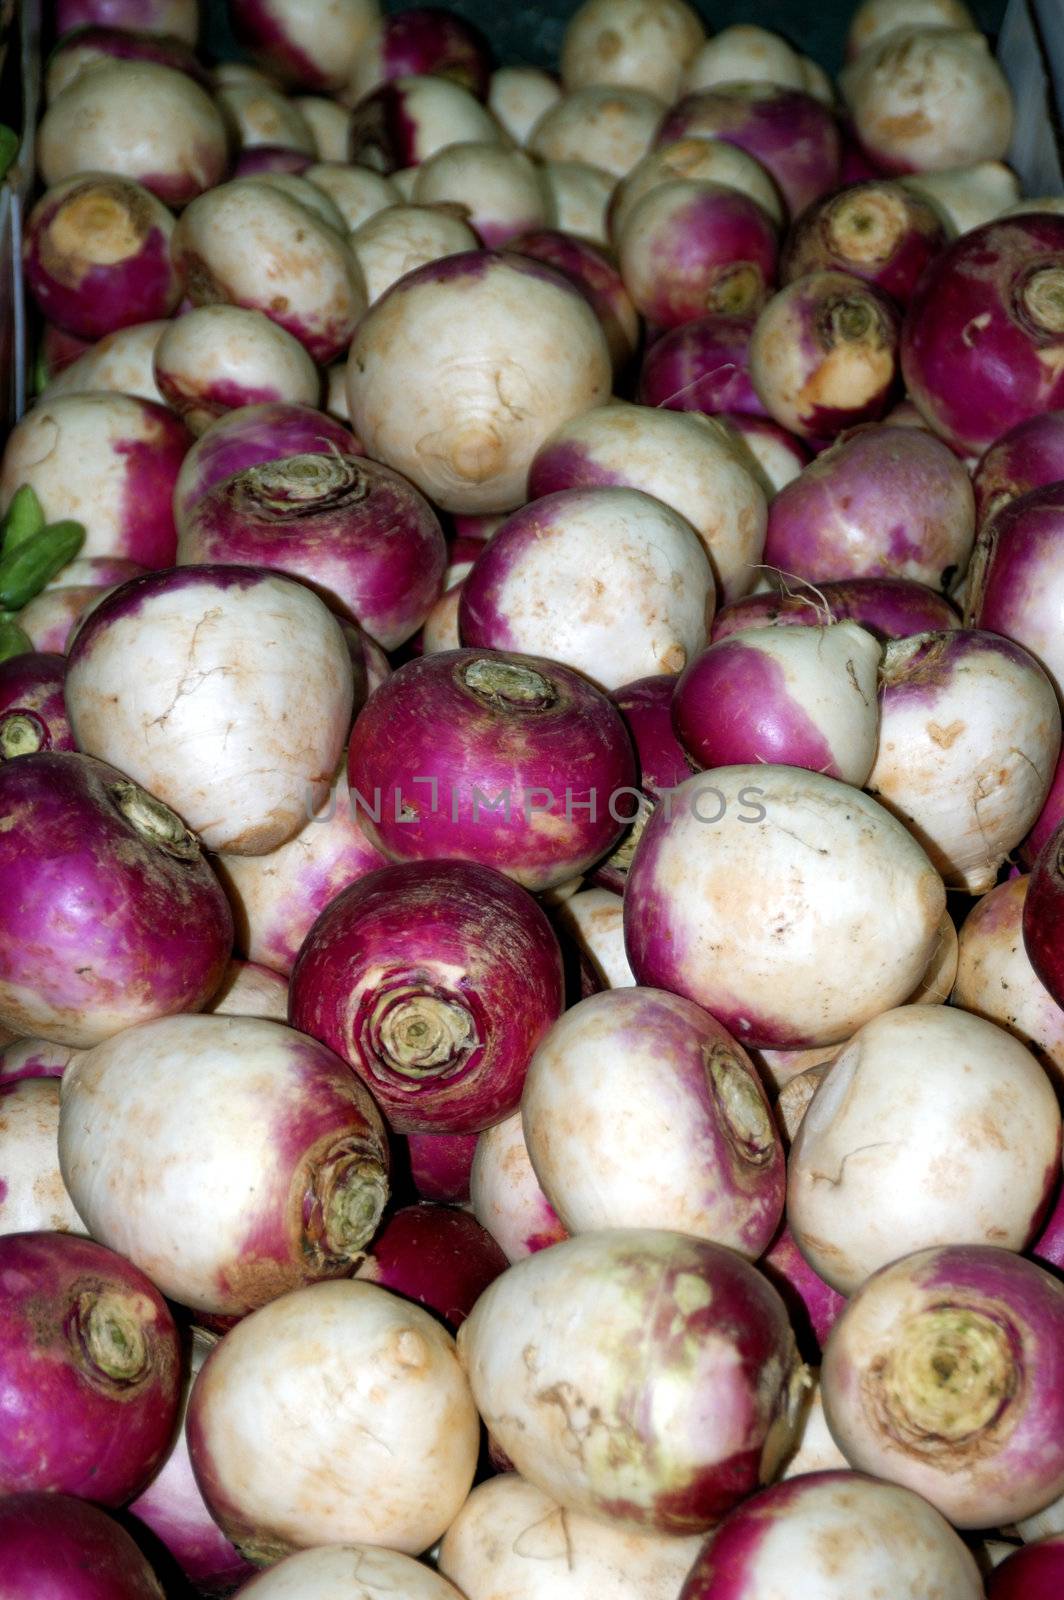 Freshly produced turnips ready for sale at a local farmer's market